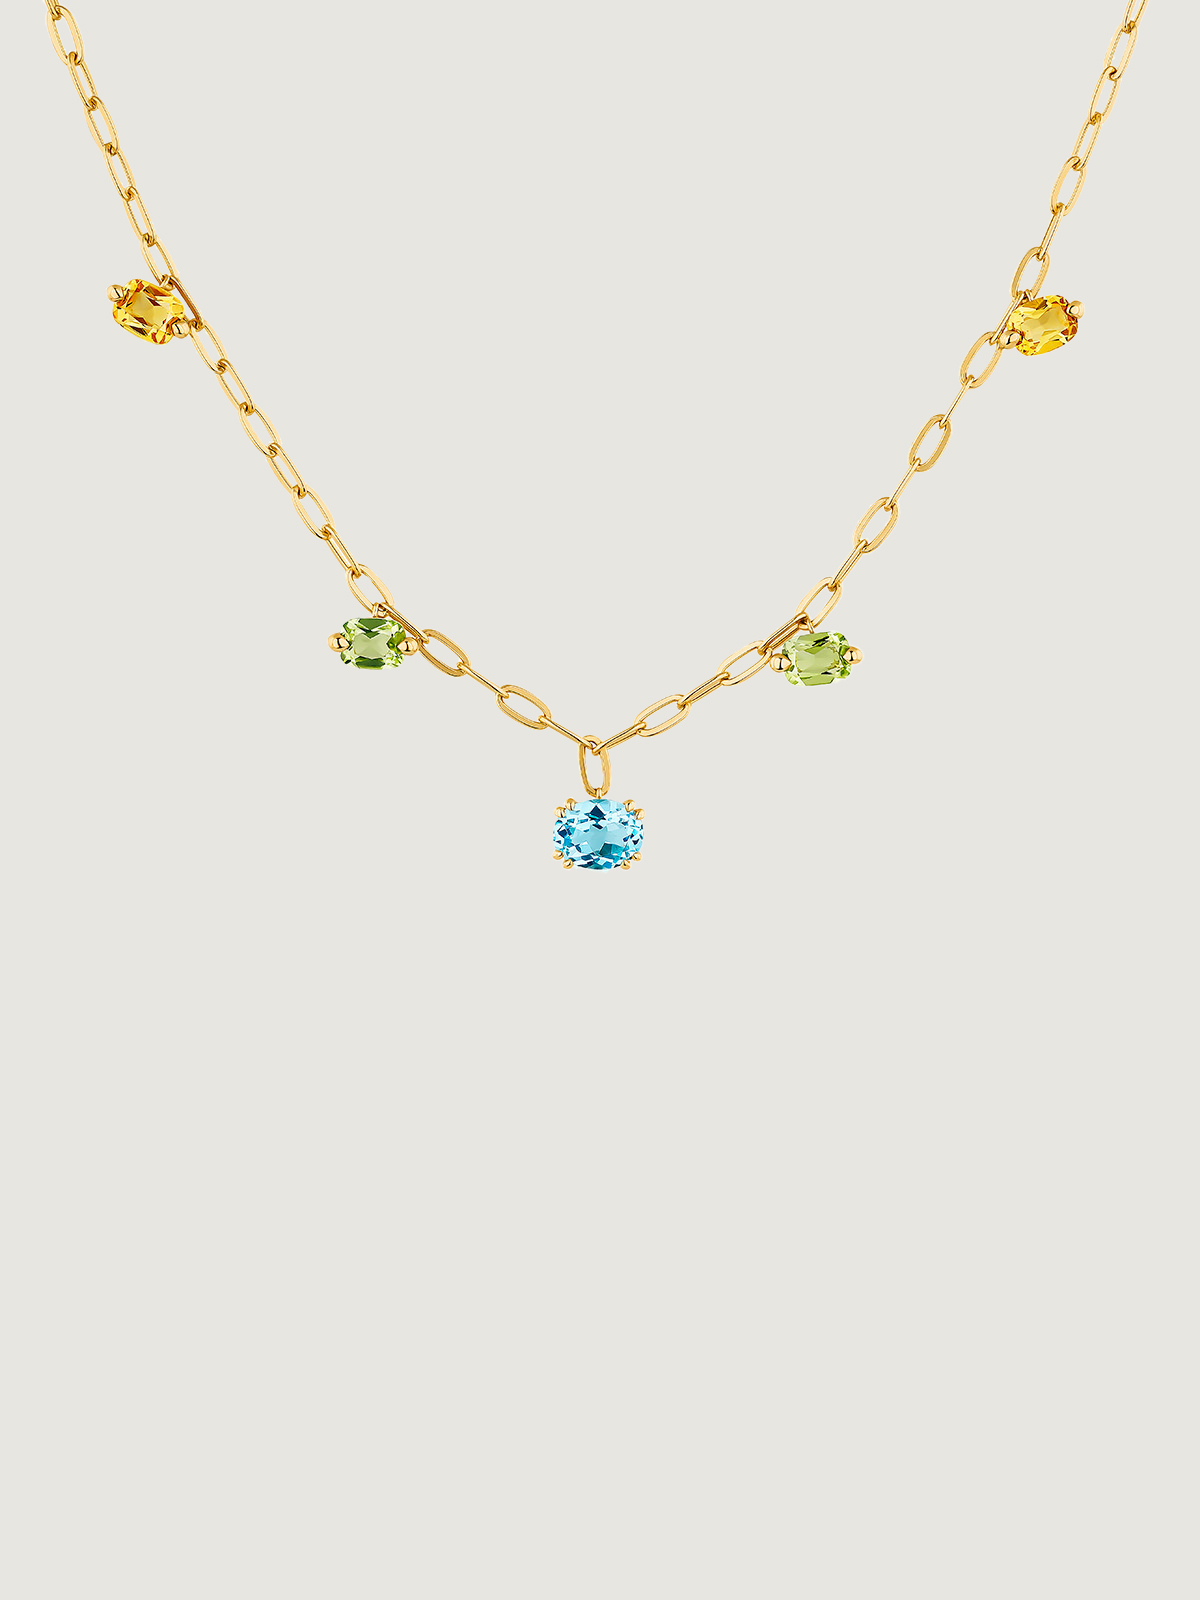 925 Silver necklace bathed in 18K yellow gold with Swiss blue topazes, green peridots and citrines.